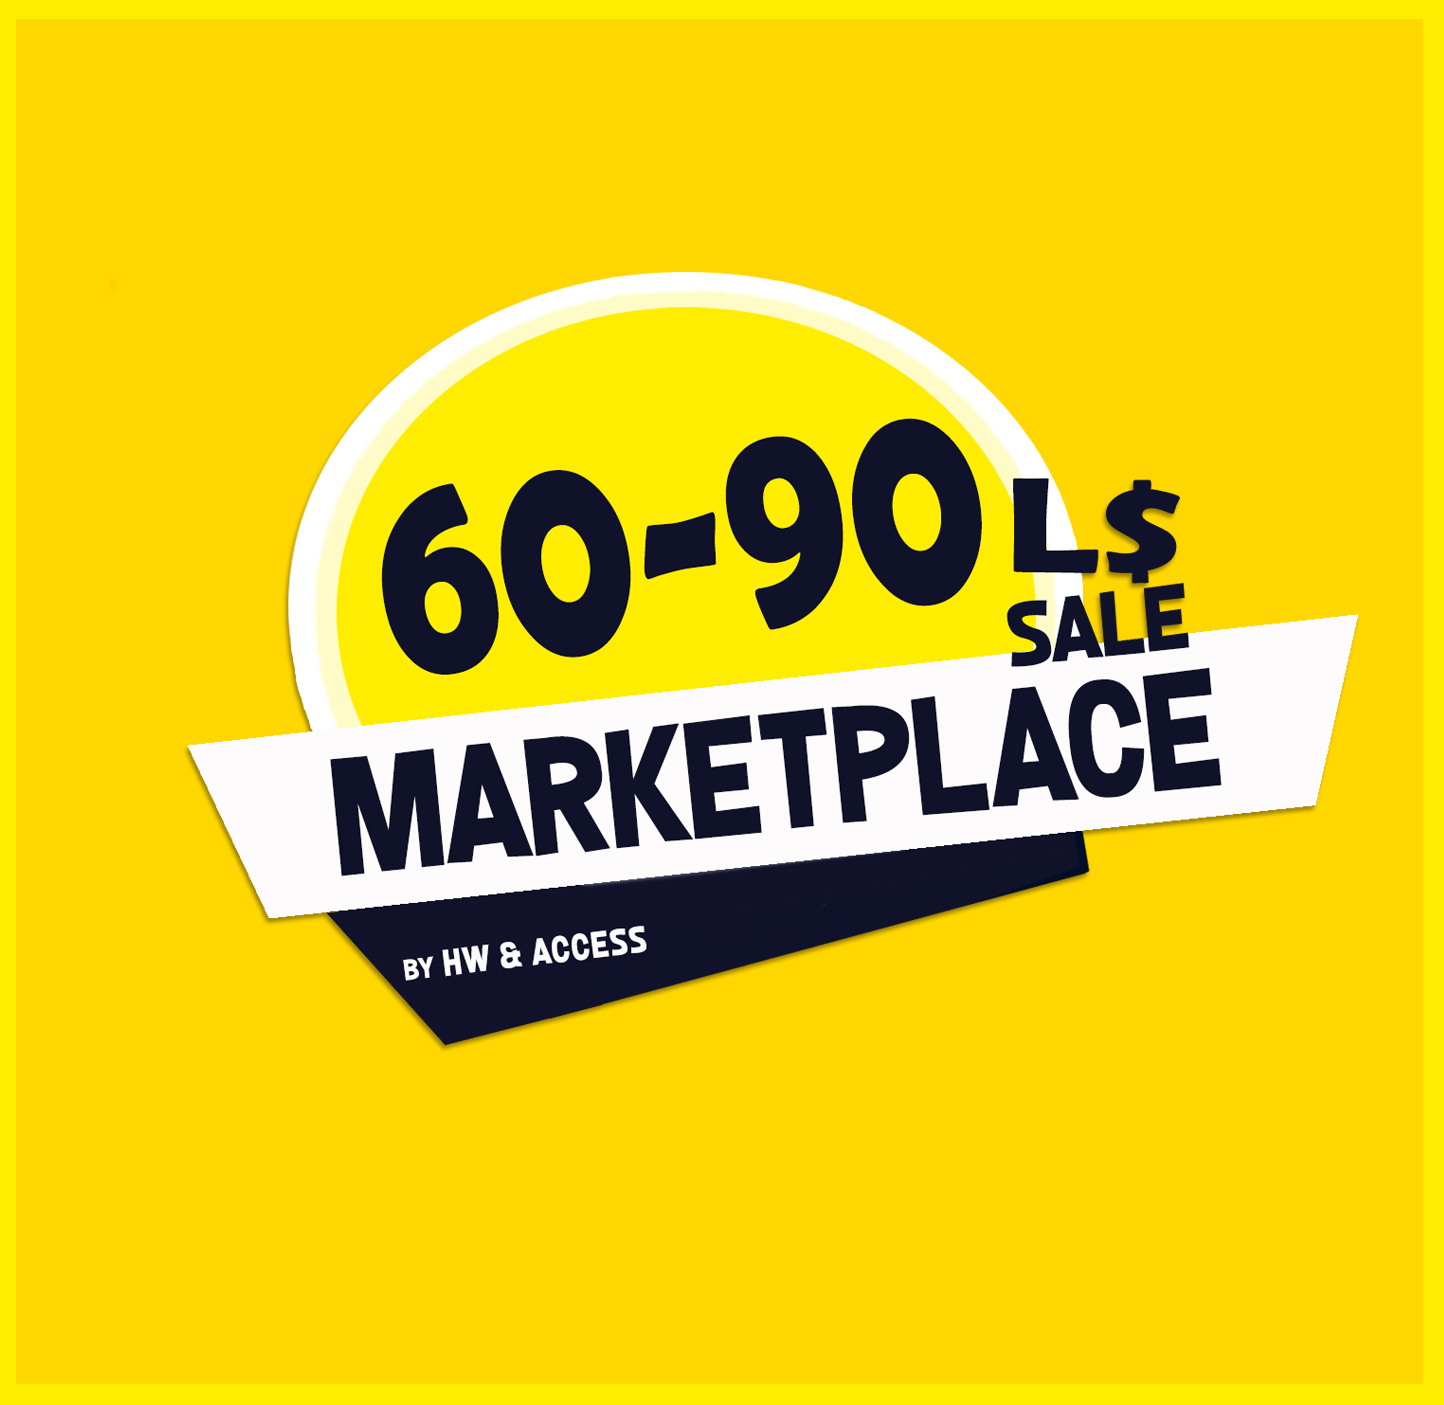 MIDDLE OF THE WEEK MADNESS WITH THE 60-90L$ MARKETPLACE SALE BY HW!